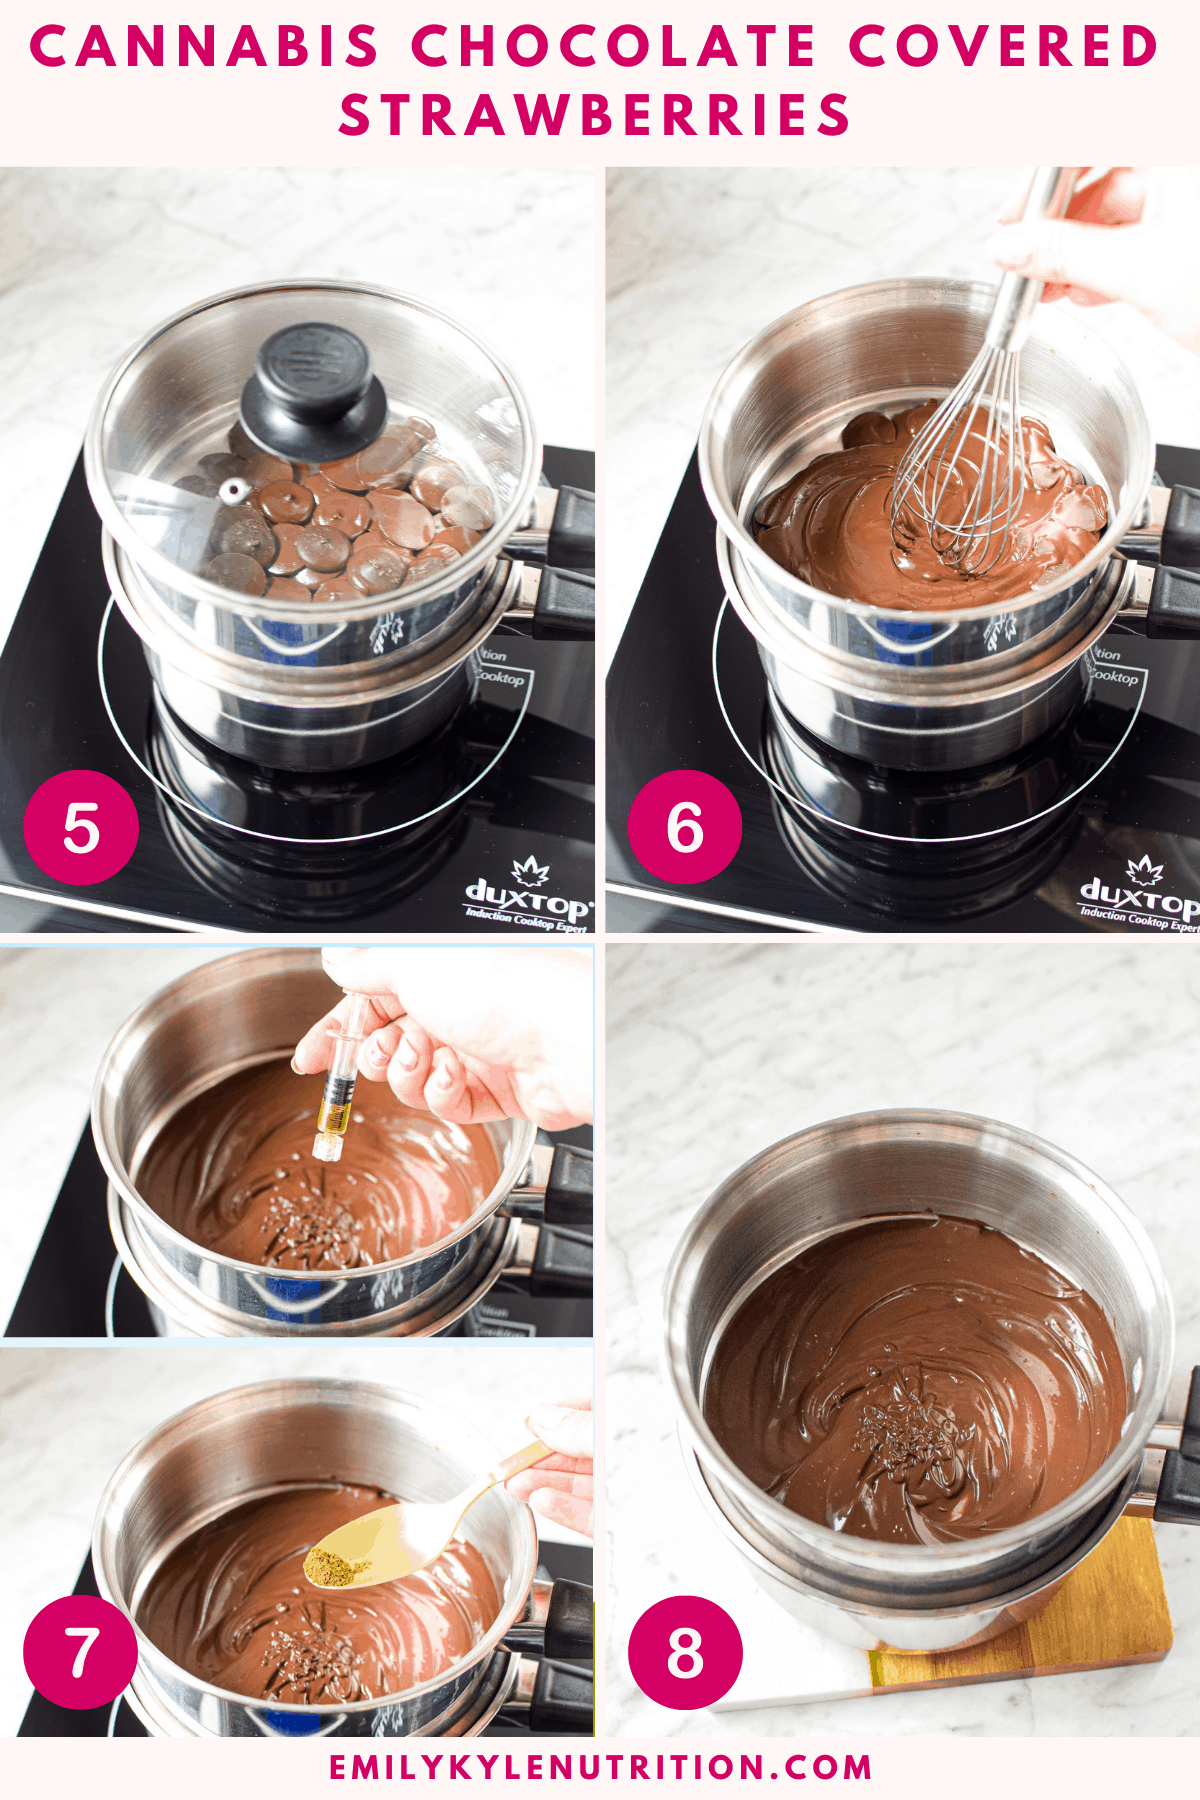 A 4 step image collage showing steps 5-8 for making chocolate covered strawberries including the melting chocolates melting, a whisk melting them, a hand putting the concentrates and cannabis in, and the final melted chocolate